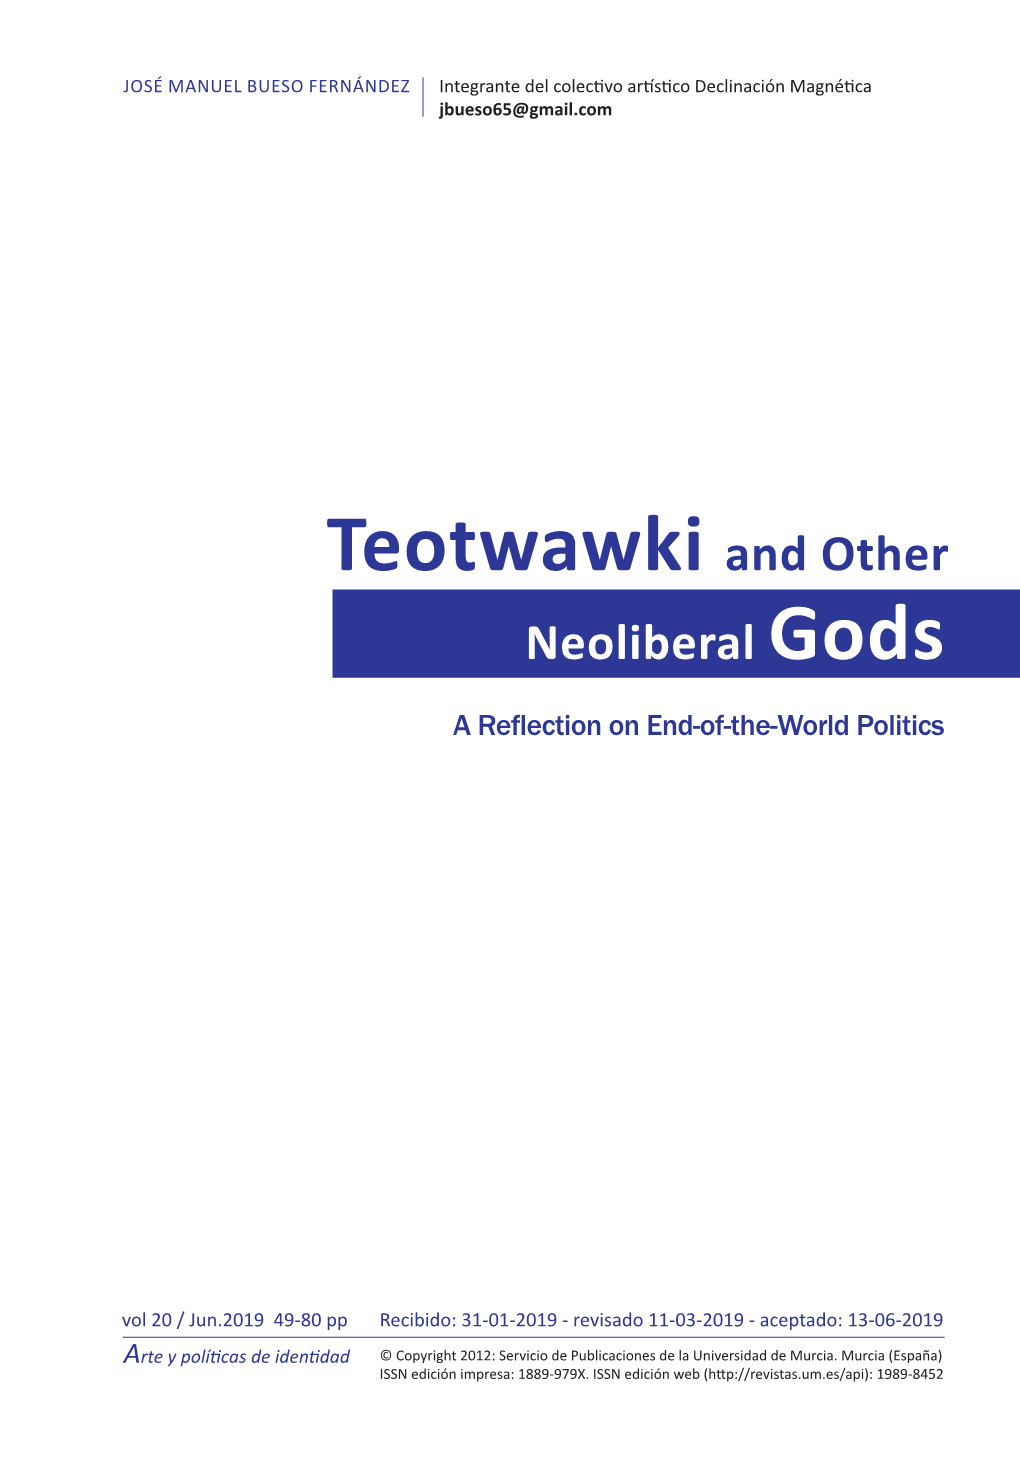 Teotwawki and Other Neoliberal Gods